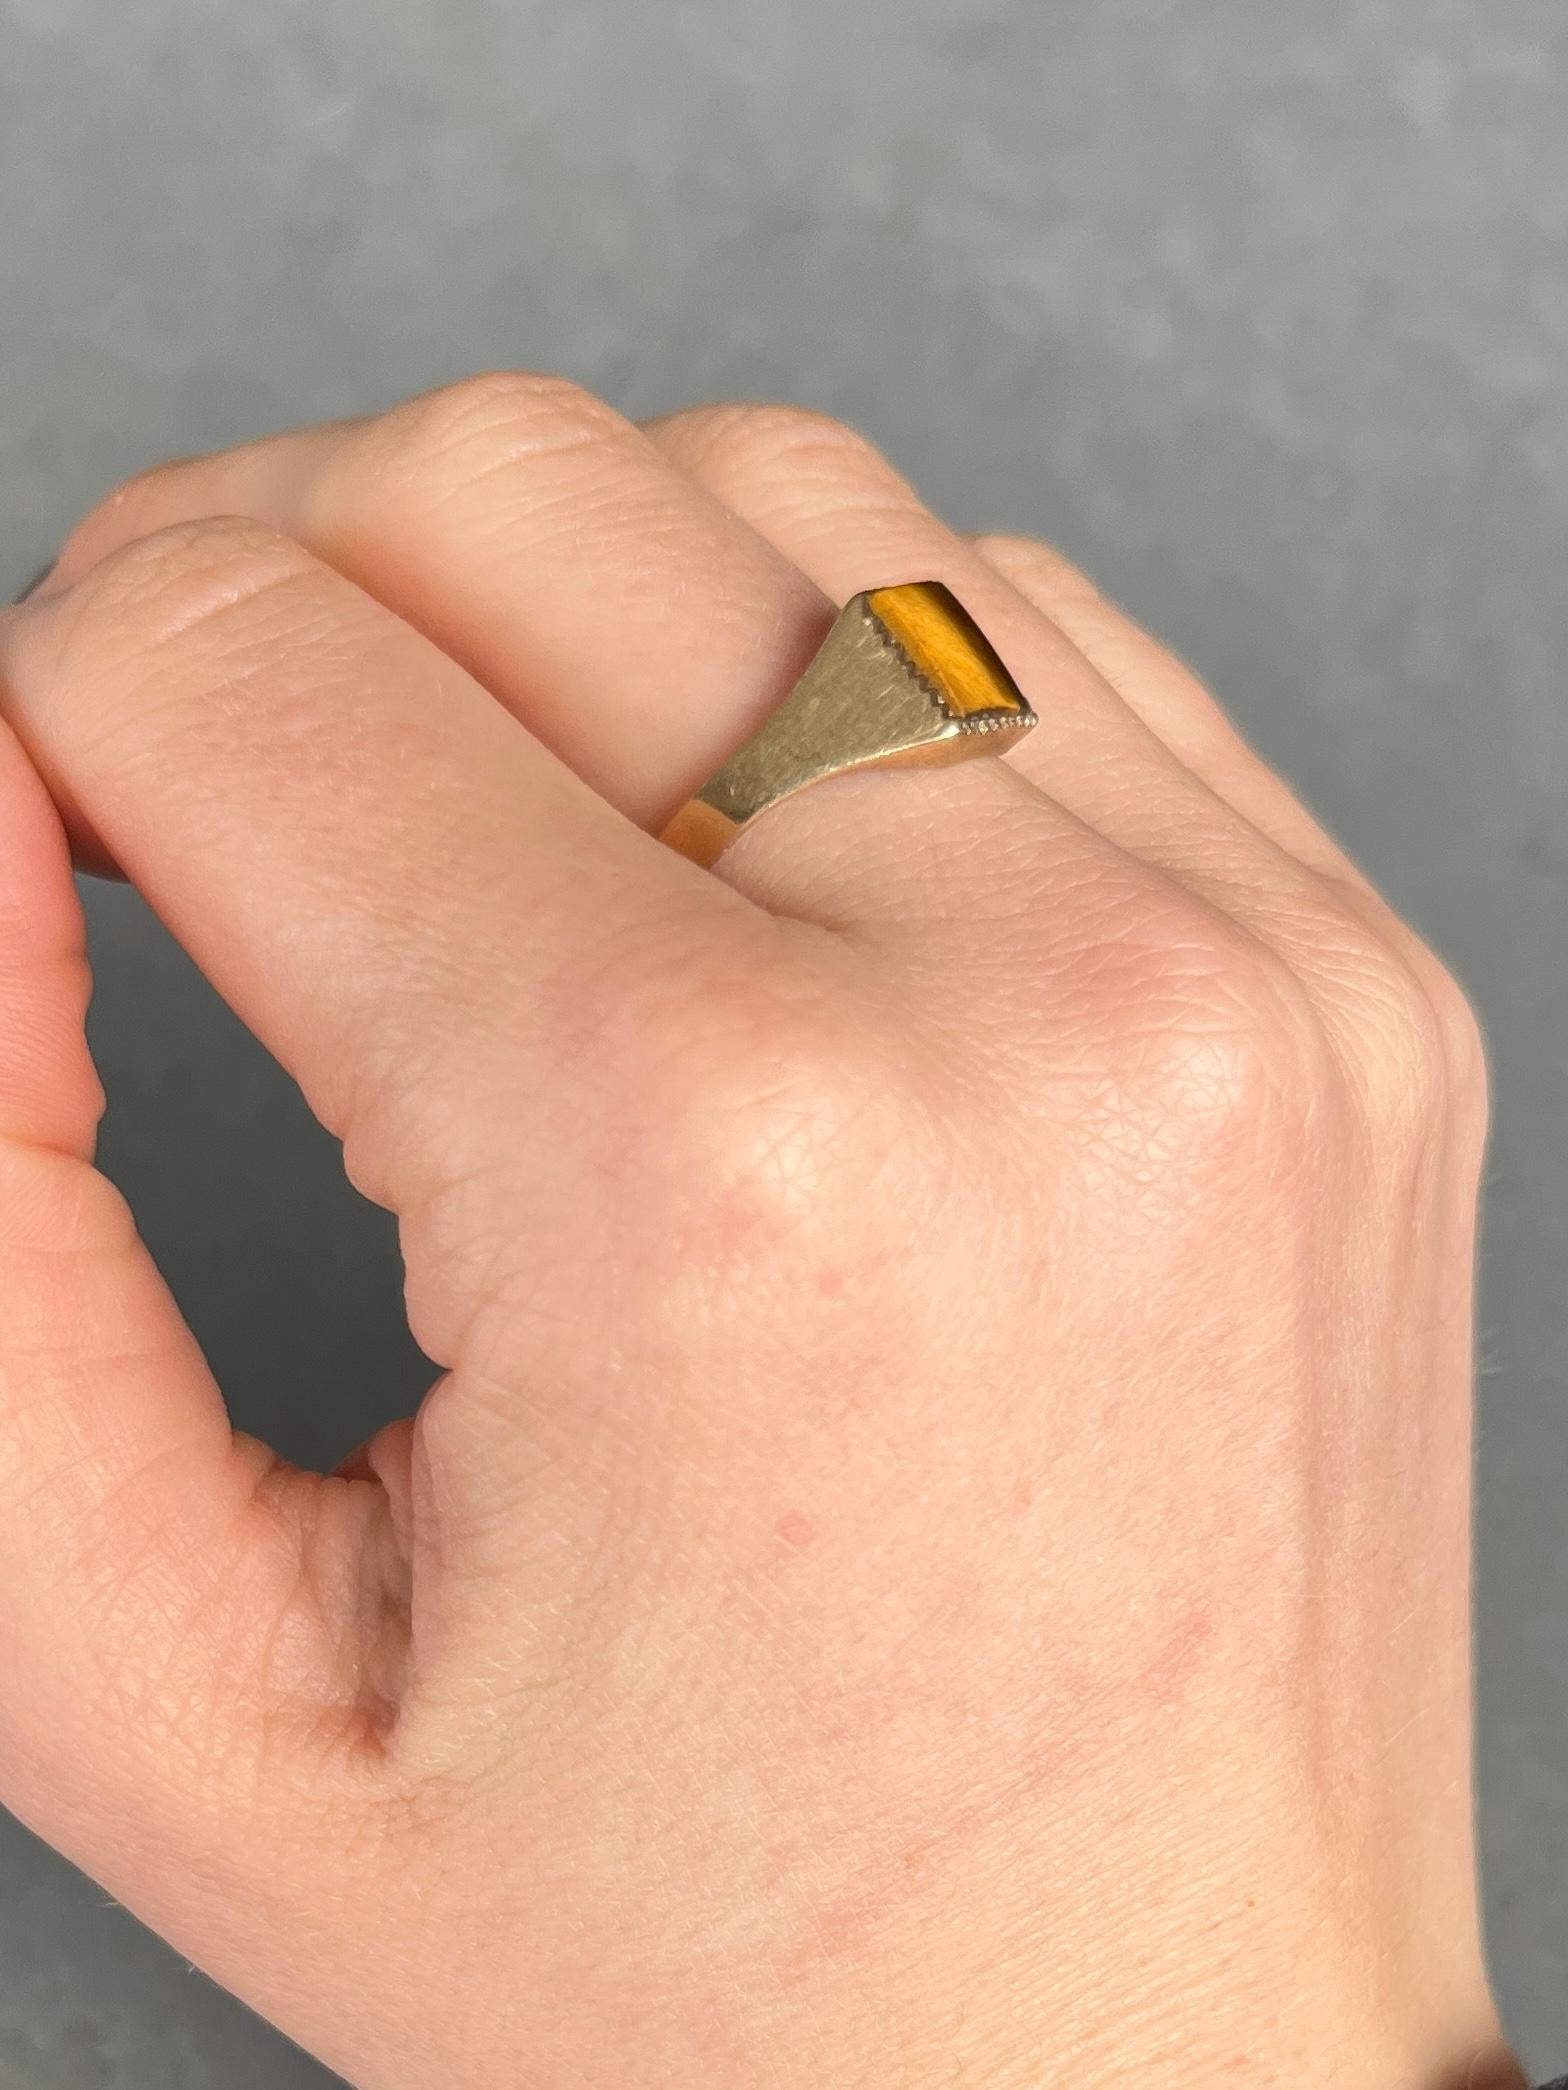 This tigers eye stone is truly mesmerising. They give the classic brown colour with fine stripes of darker brown running through it. The setting is modelled in 9ct gold. Hallmarked London 1979.

Size: Q 1/2 or 8 1/2 
Face Dimensions: 6x8mm 

Weight: